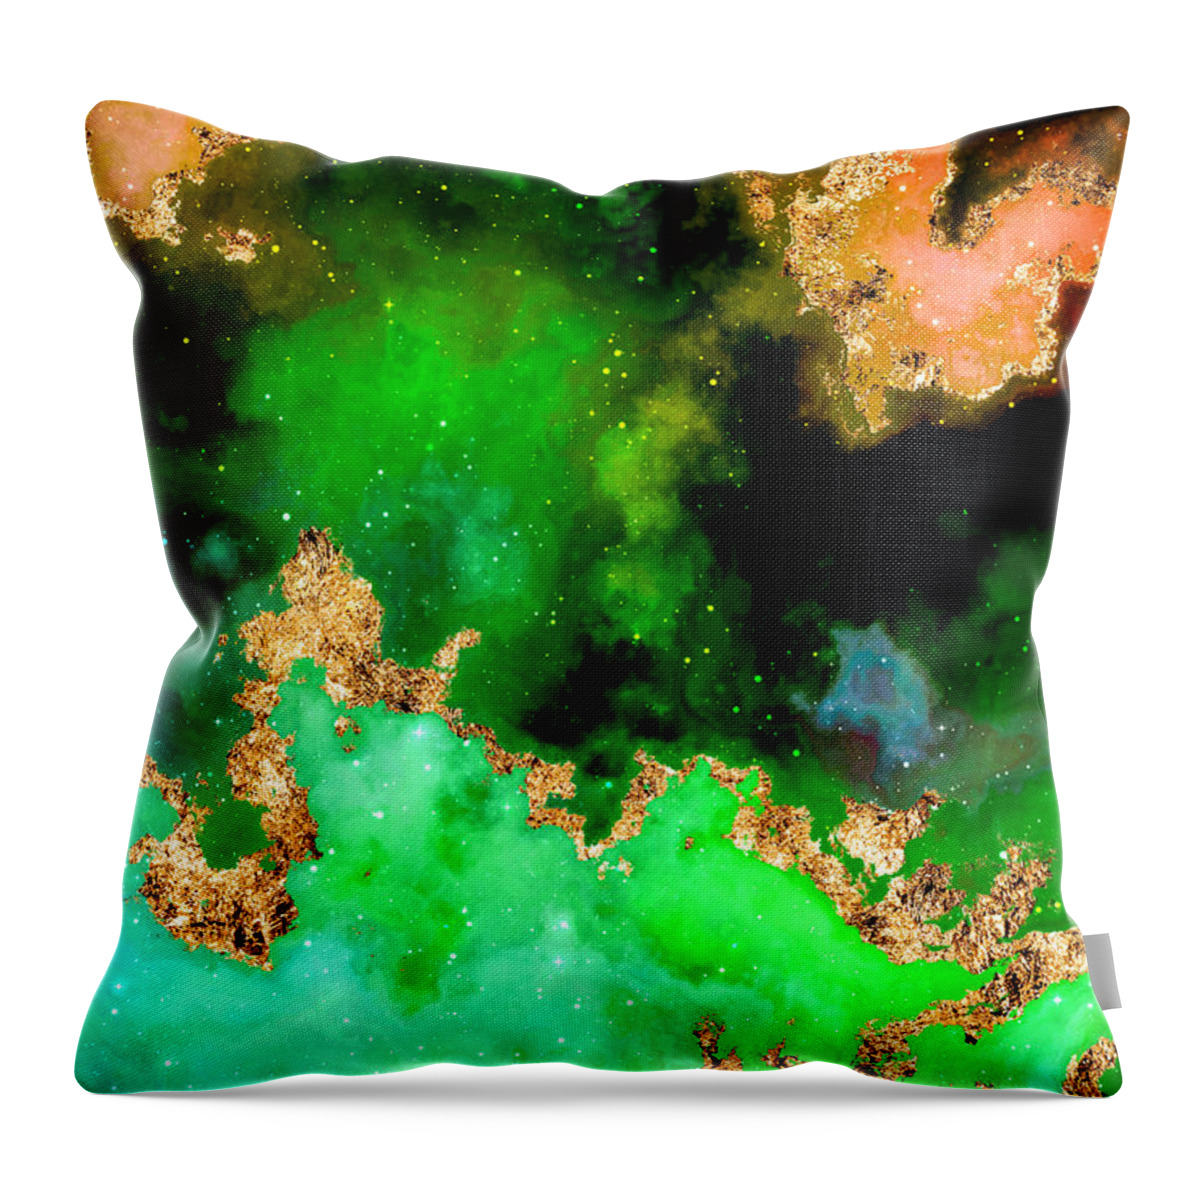 Holyrockarts Throw Pillow featuring the mixed media 100 Starry Nebulas in Space Abstract Digital Painting 061 by Holy Rock Design